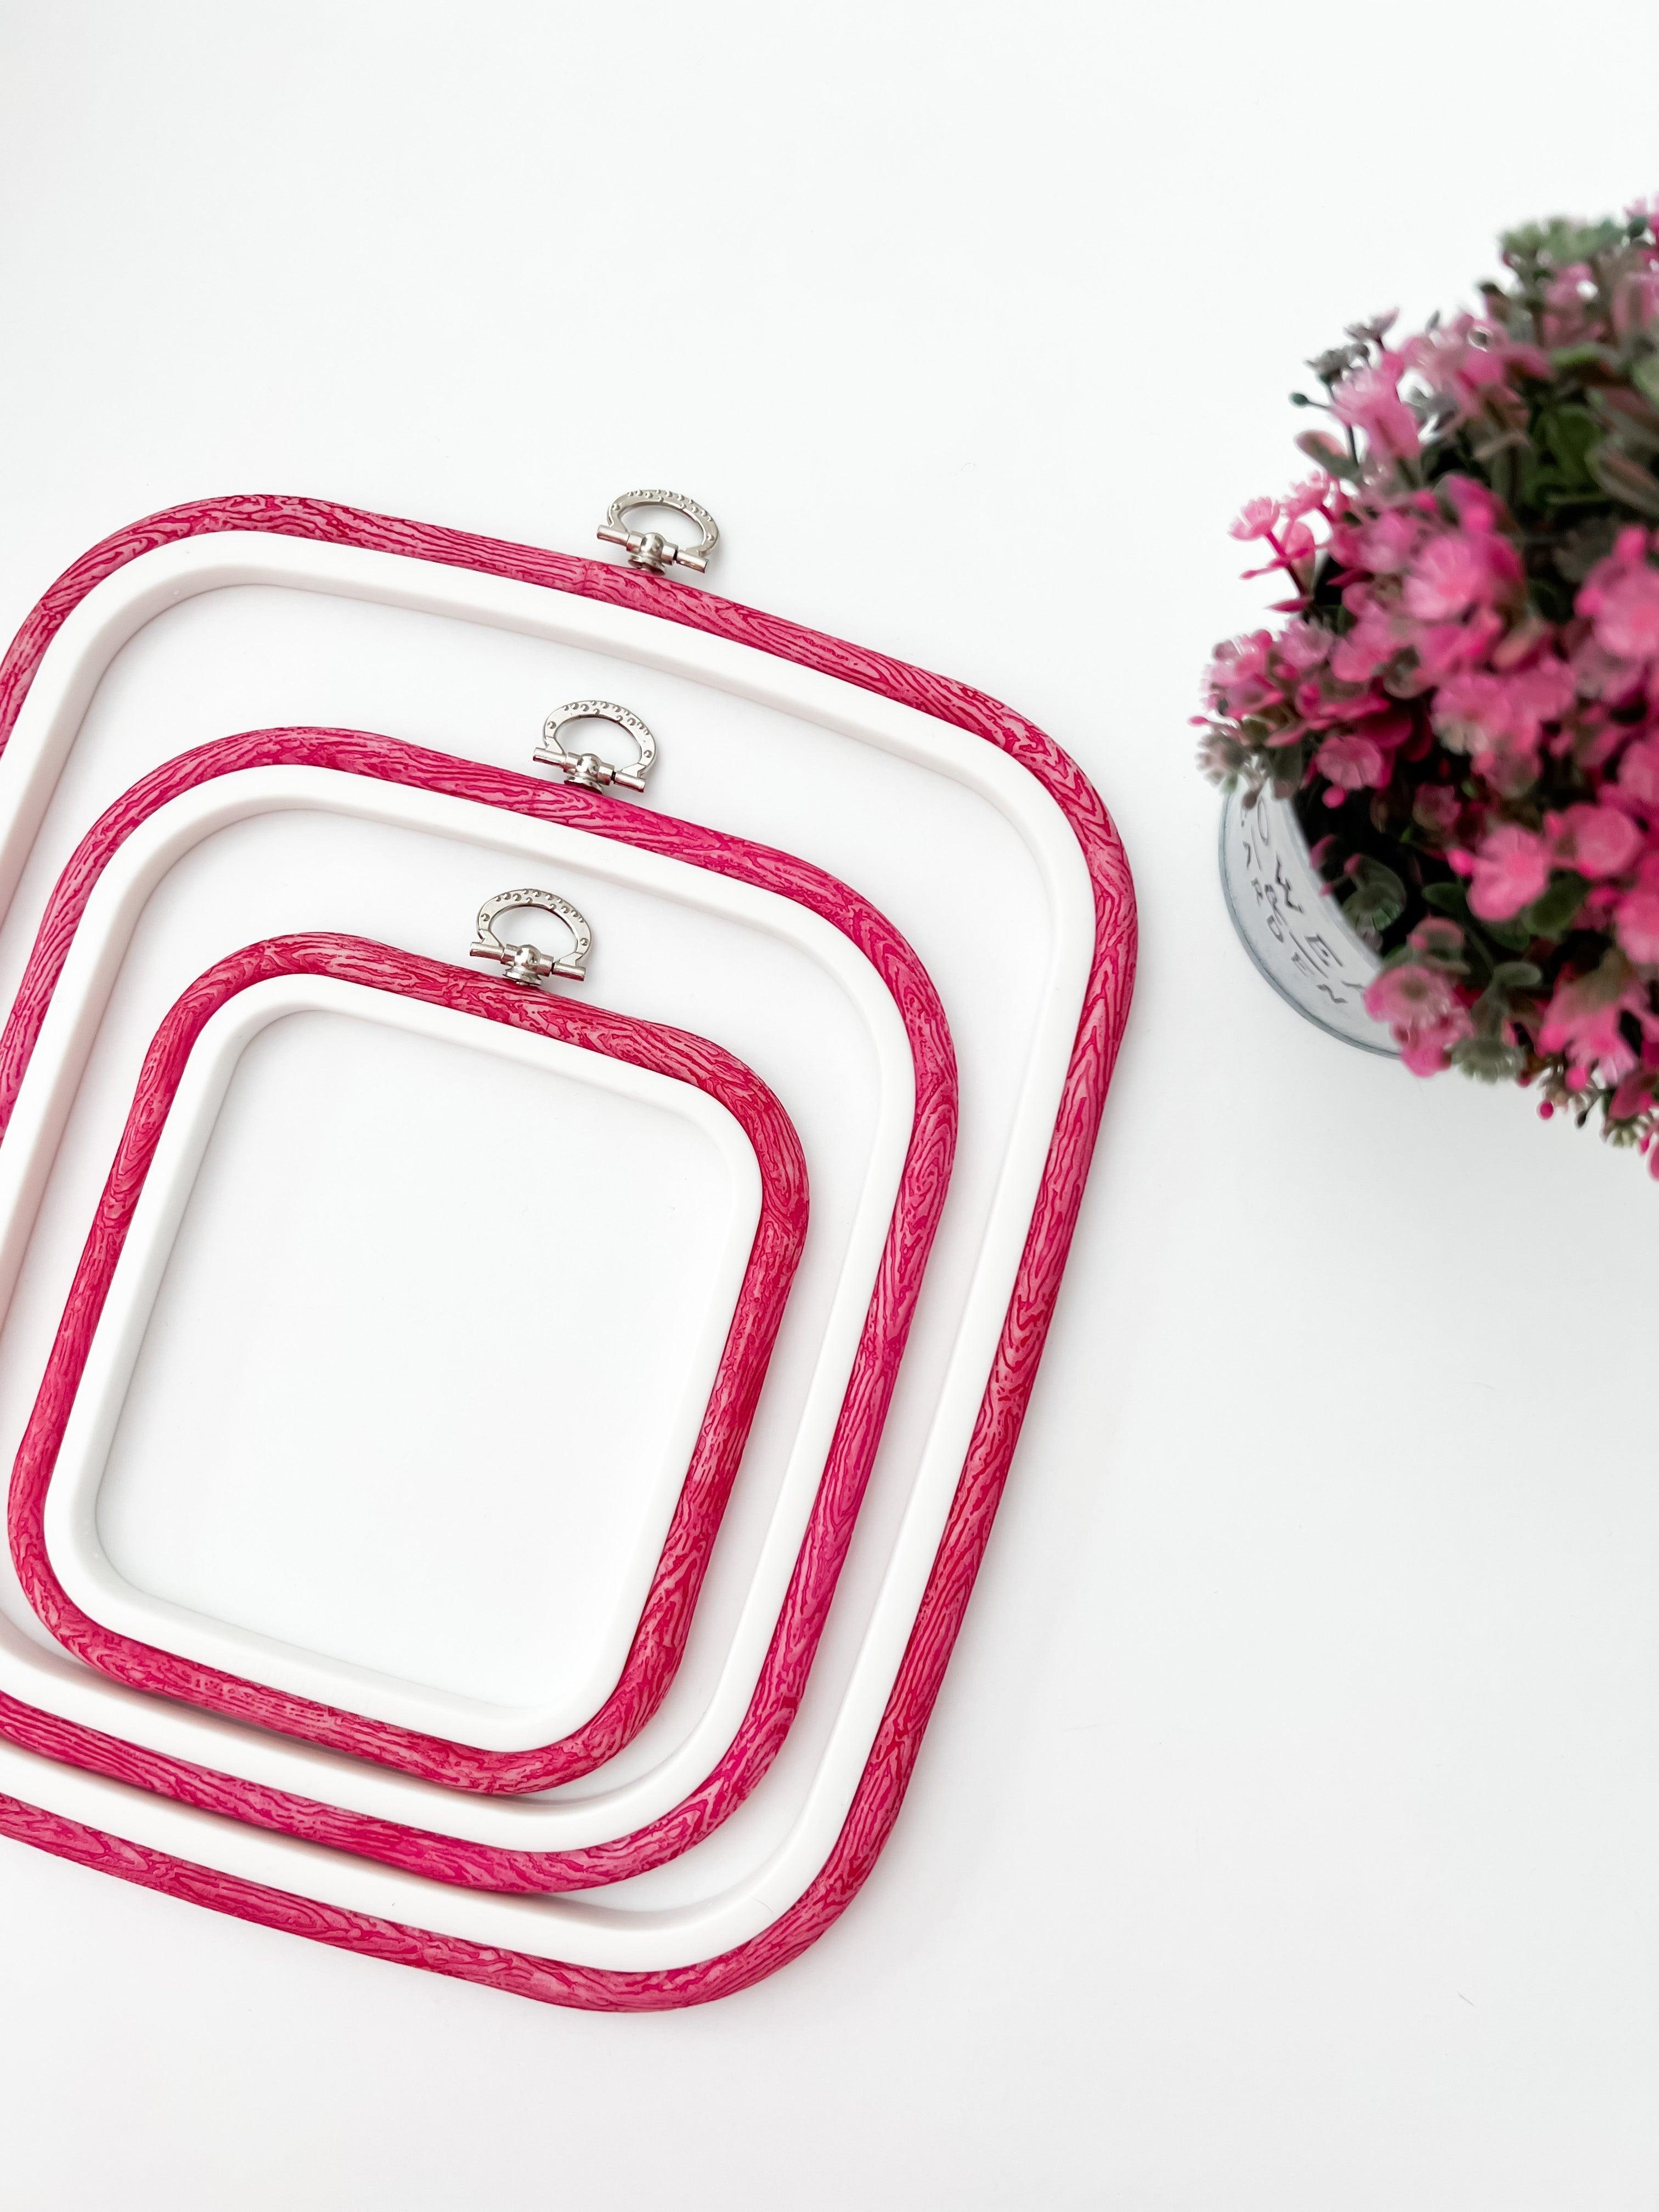 The Sqround: The Marvelous Square-Round Embroidery Hoop